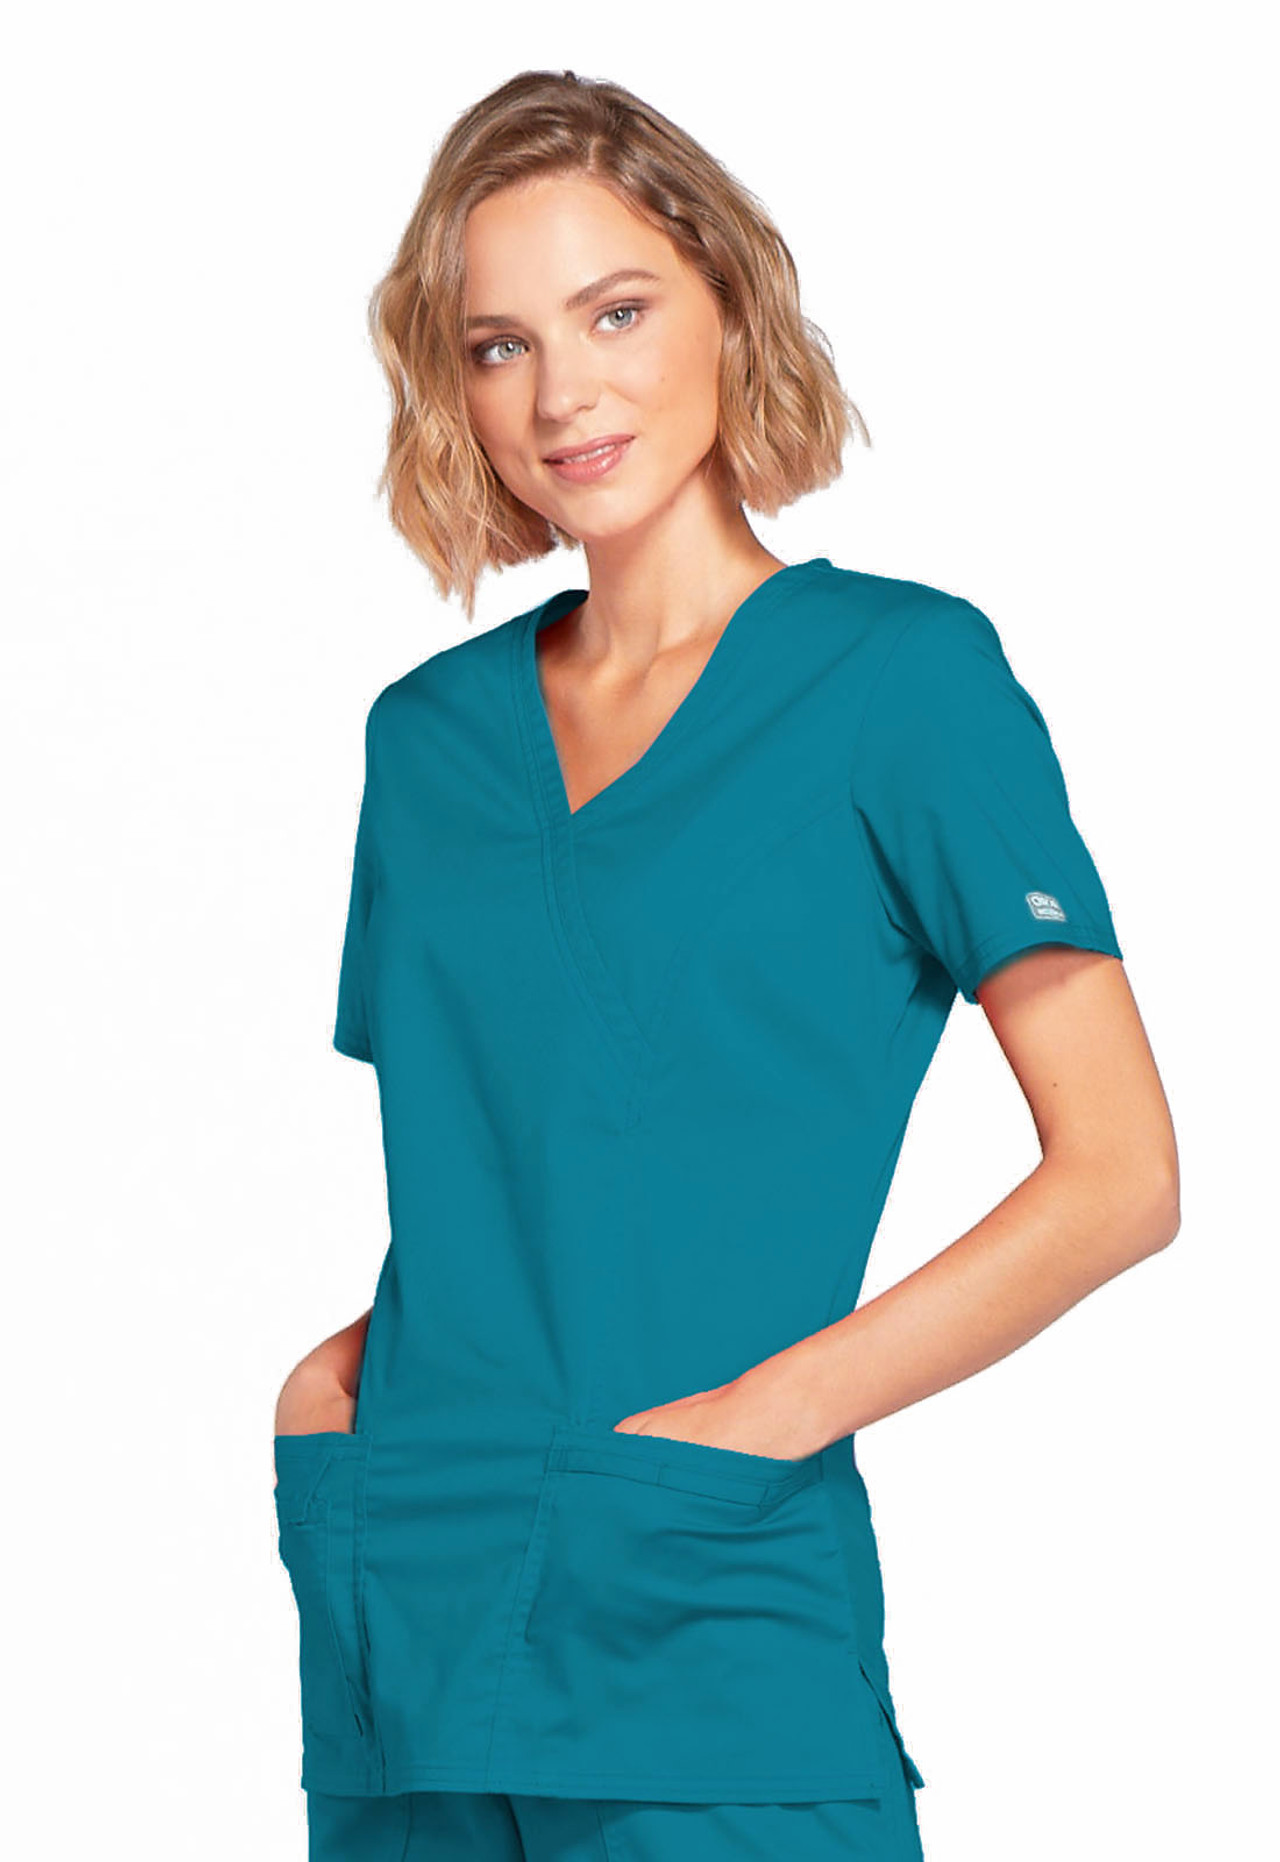 Housekeeping Uniforms | Maid Uniforms | Cleaning Uniforms | Hotel ...